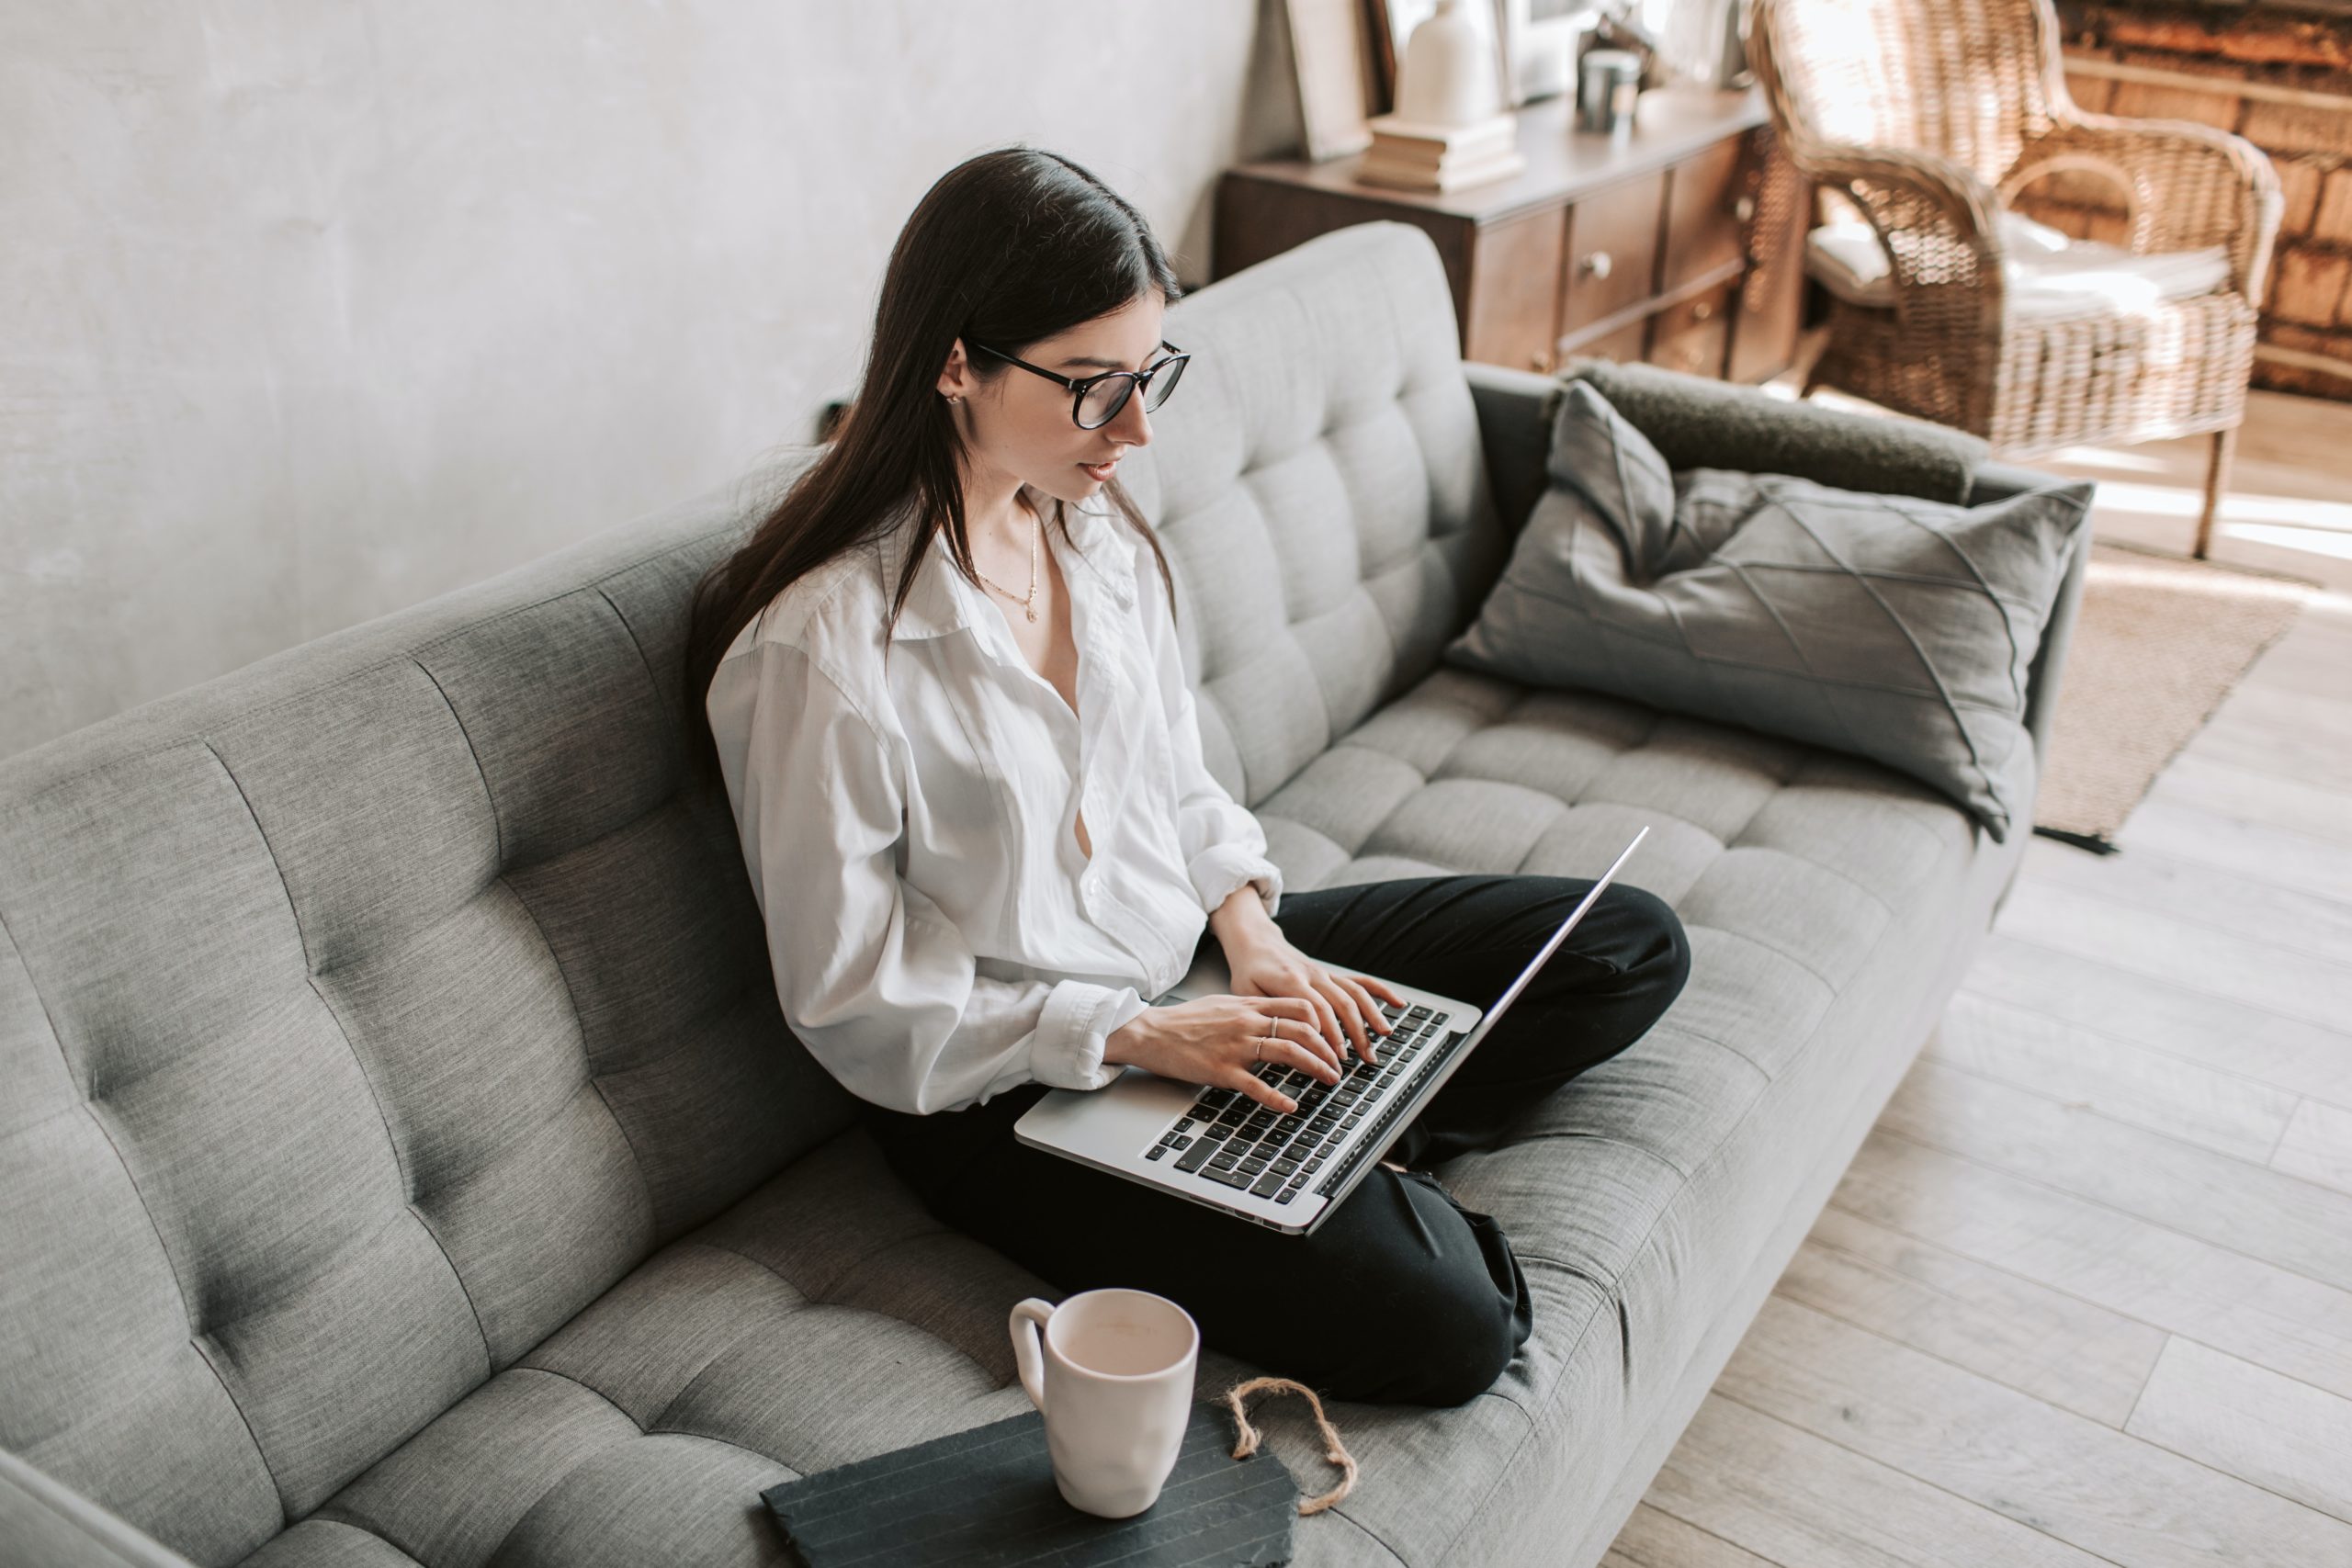 A woman sitting on a couch works on a laptop.